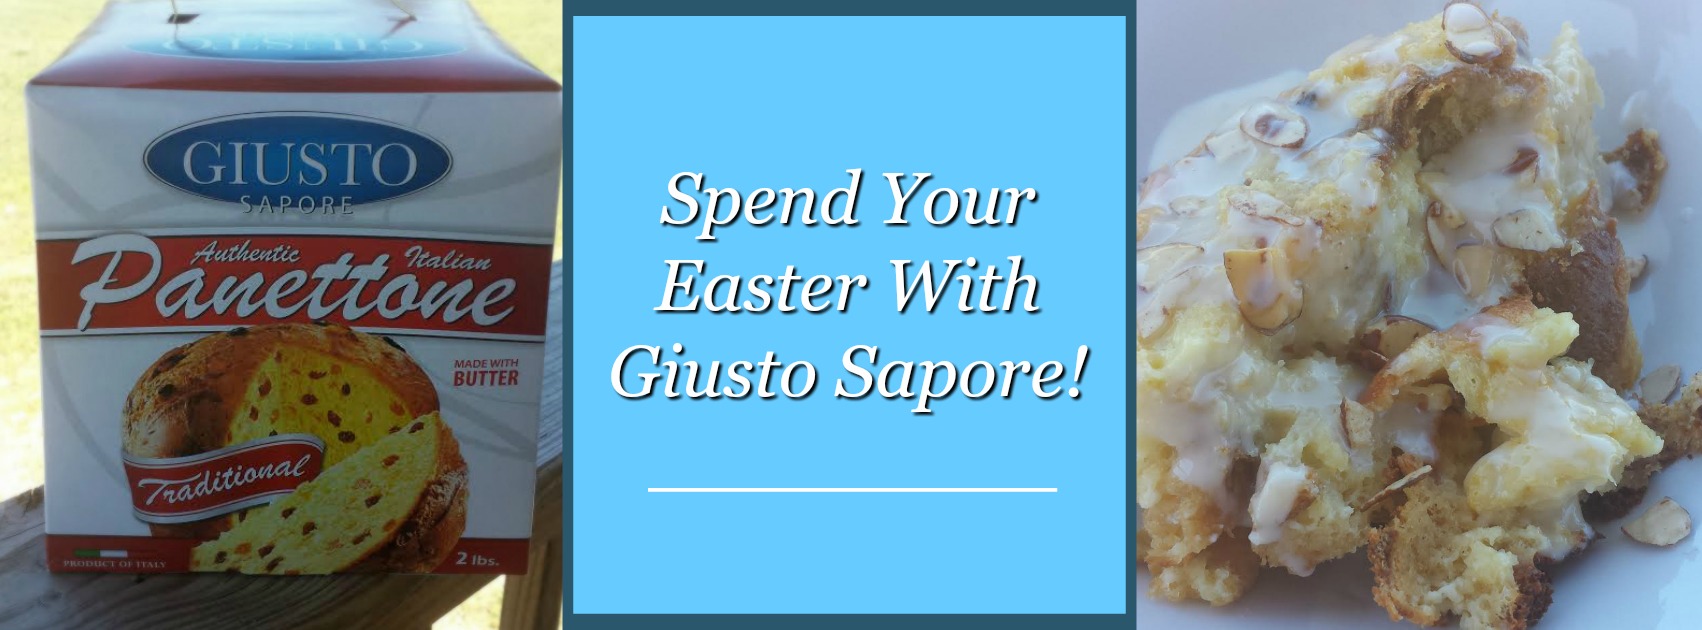 Spend Your Easter With Giusto Sapore!